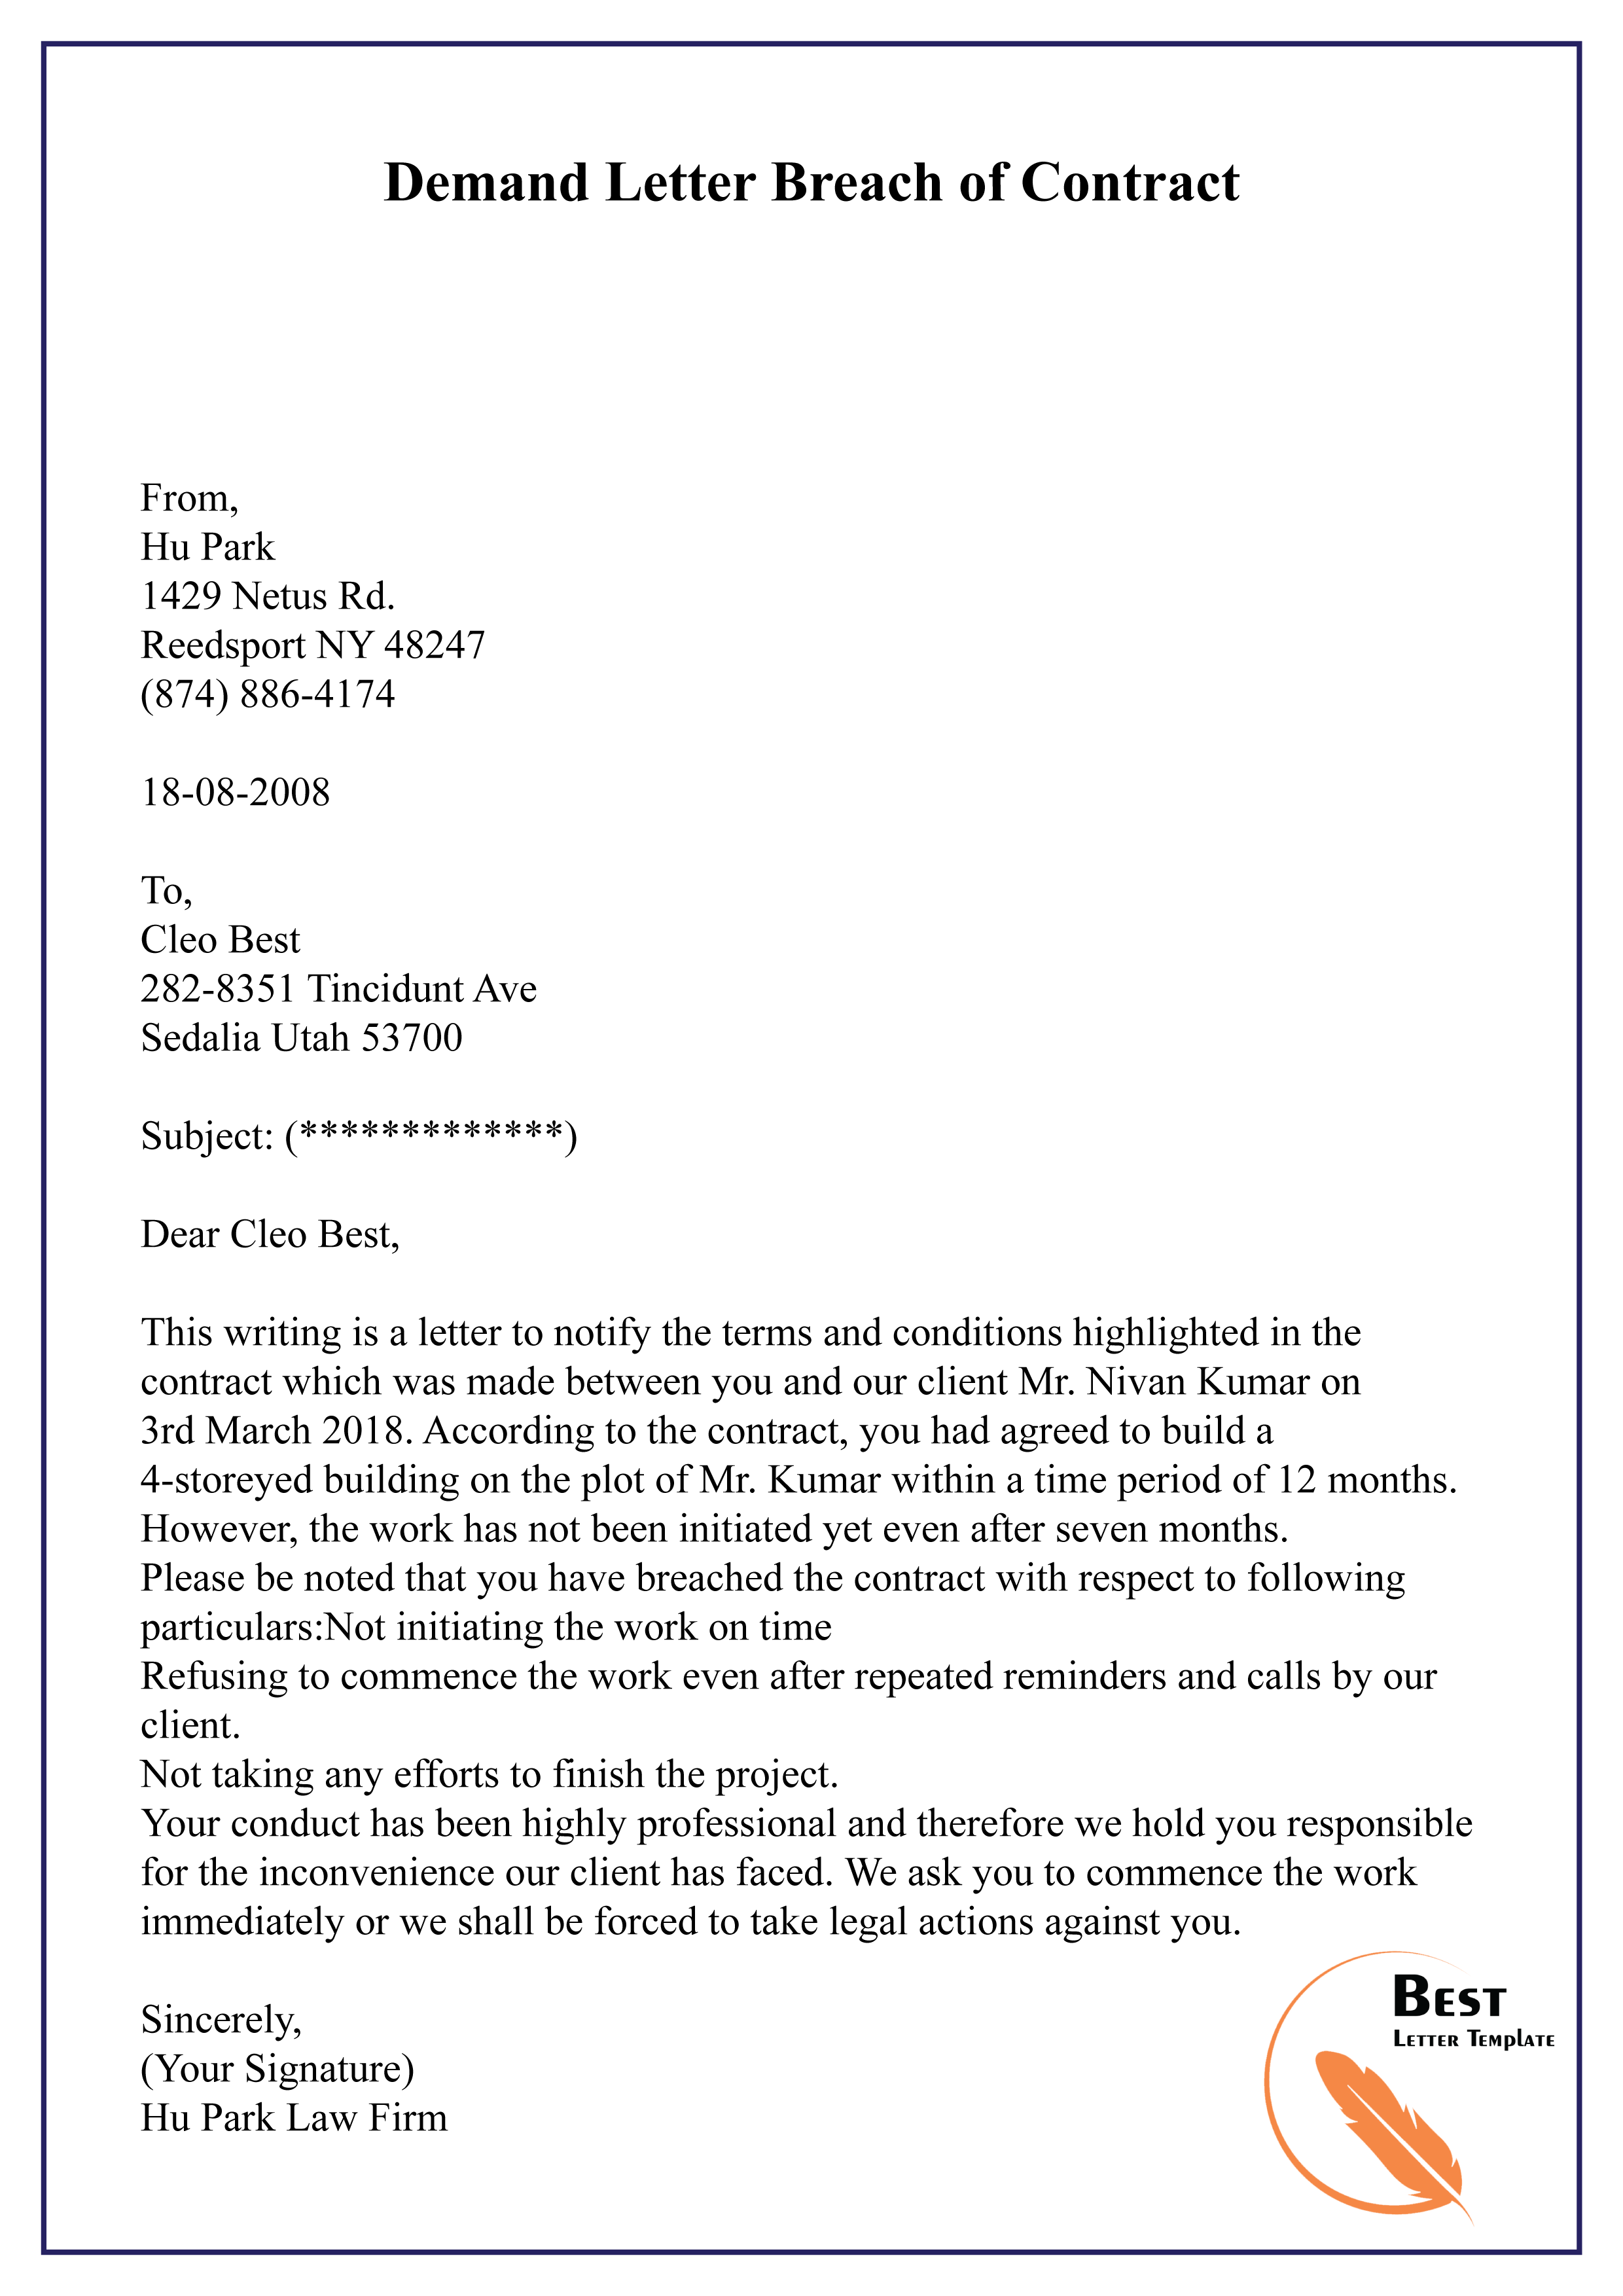 Free Breach Of Contract Letter Template from bestlettertemplate.com